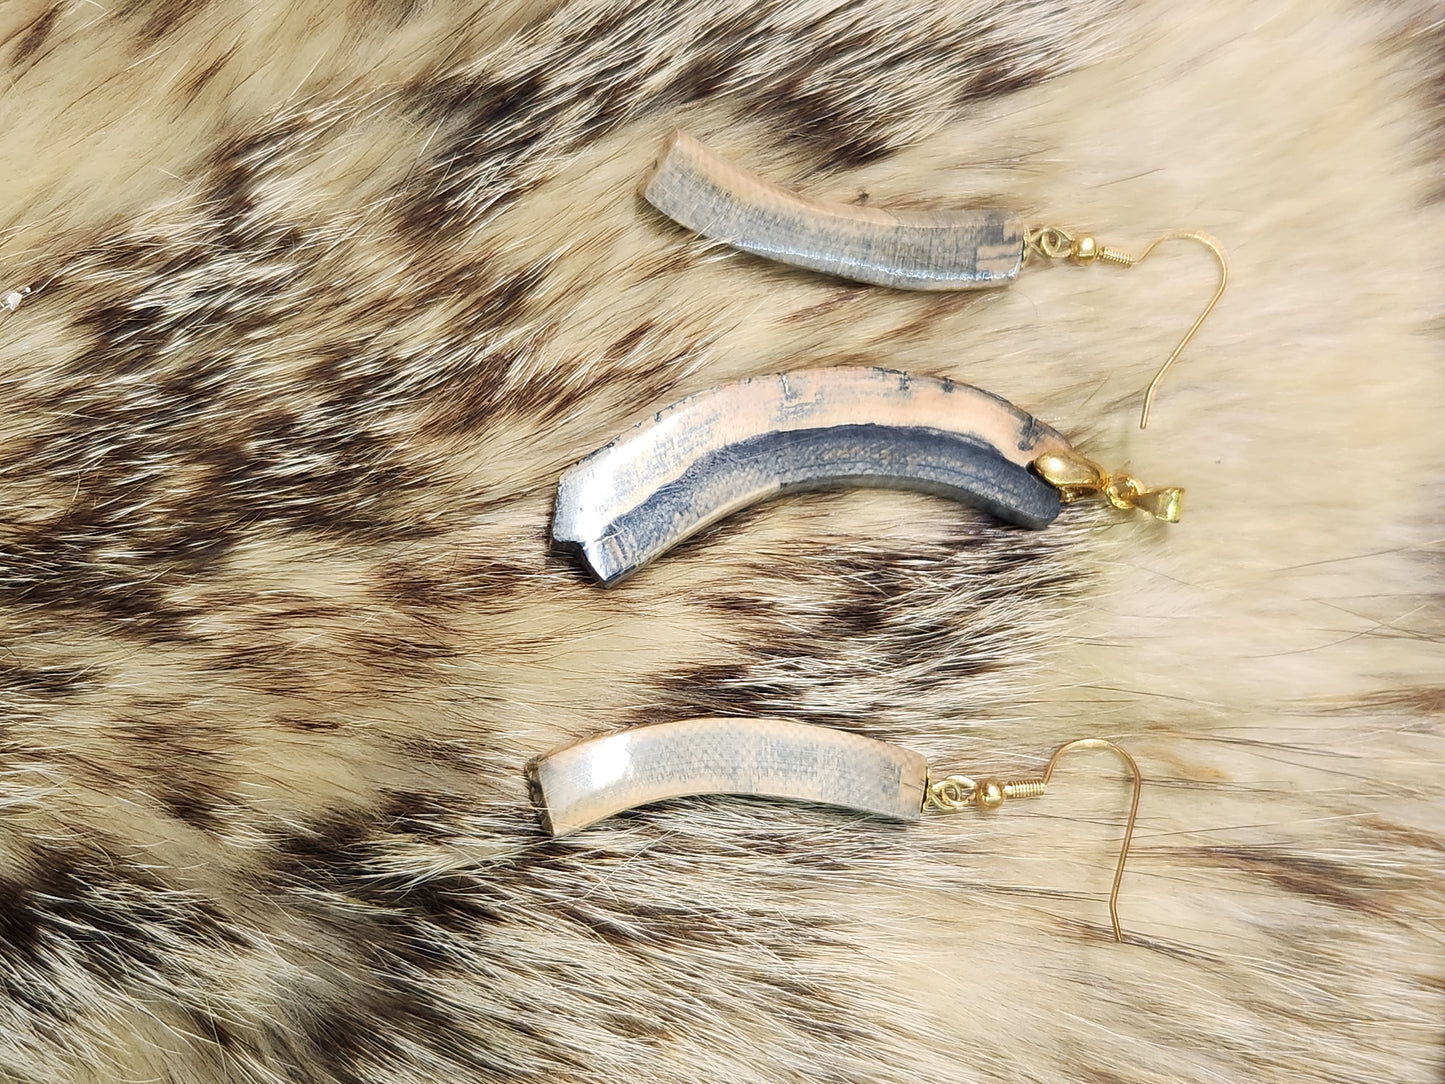 Mammoth Ivory Earings and pendant 14kt gold plated